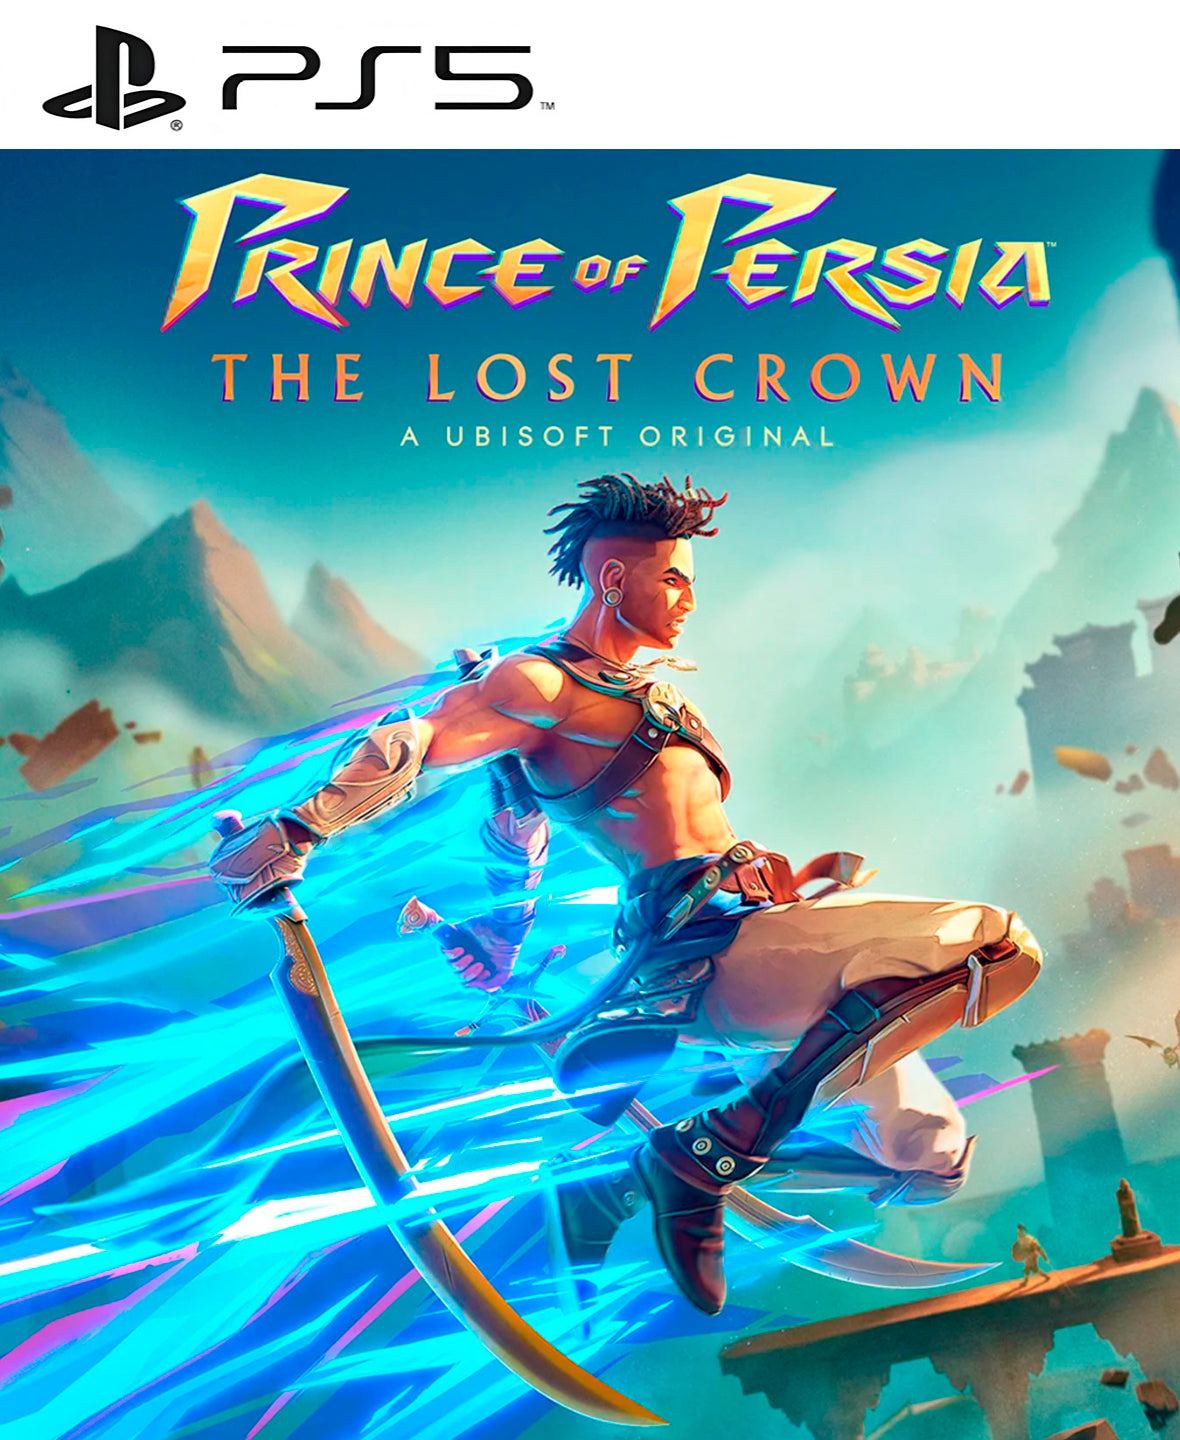 Prince Of Persia: The Lost Crown PS5